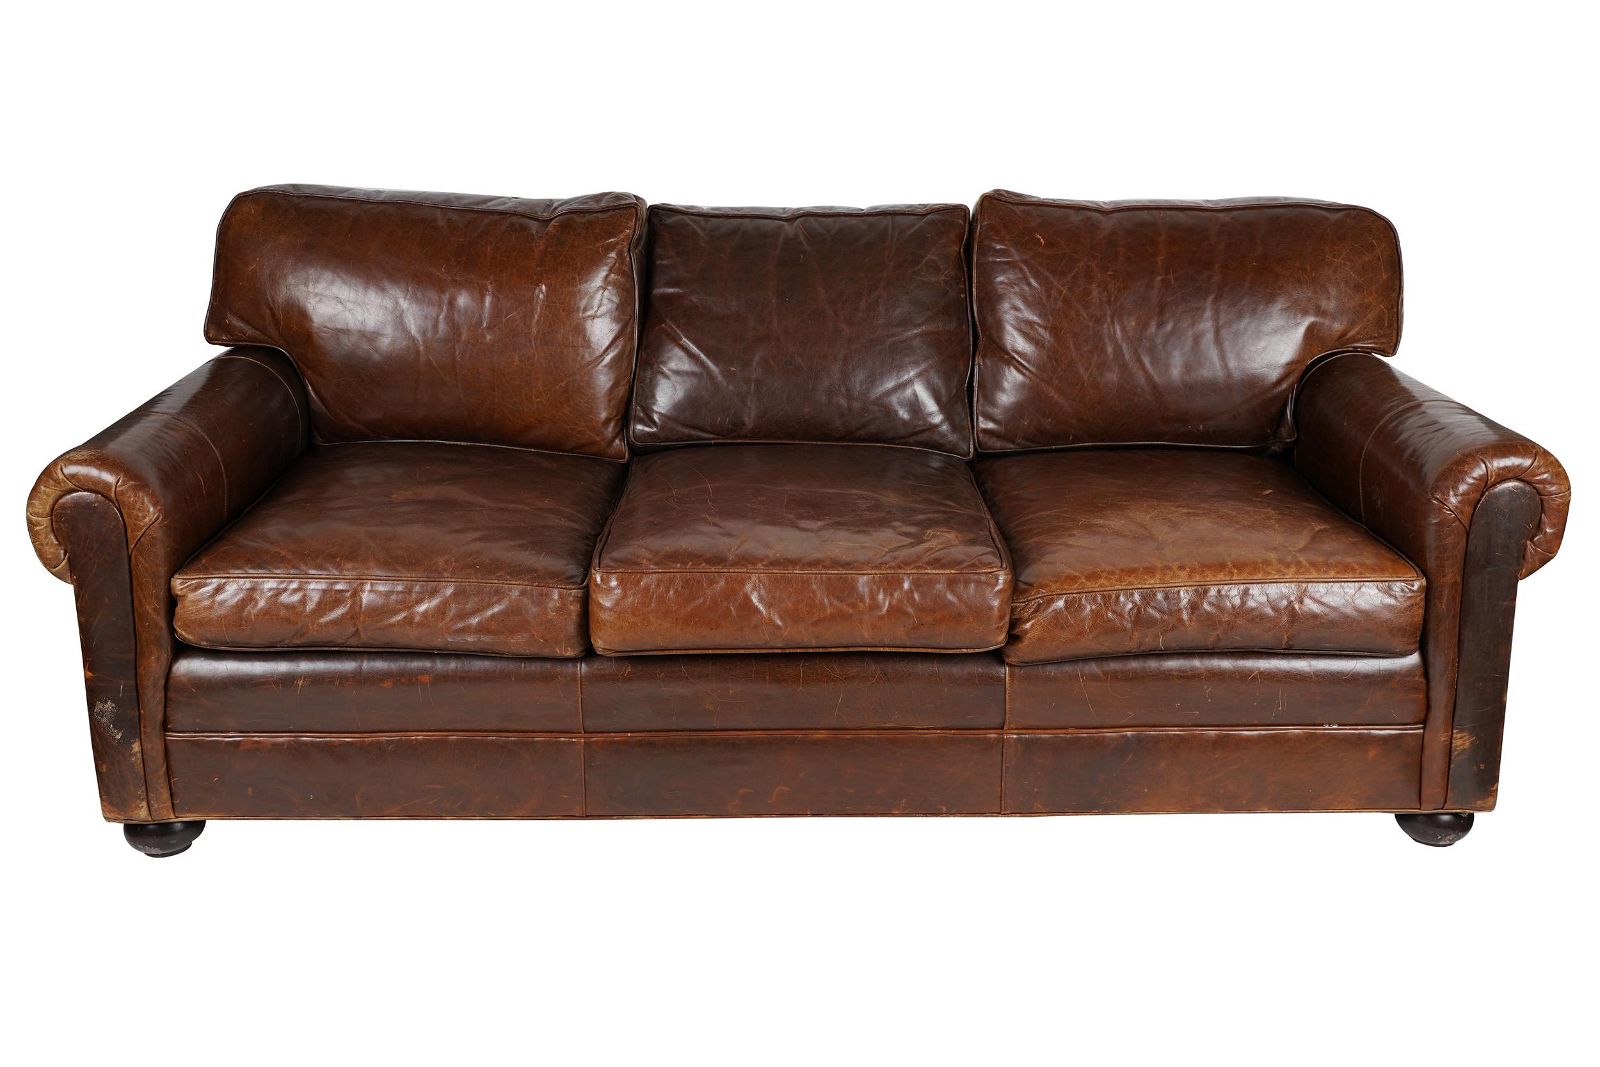 DISTRESSED BROWN LEATHER SOFAthe 3971d9